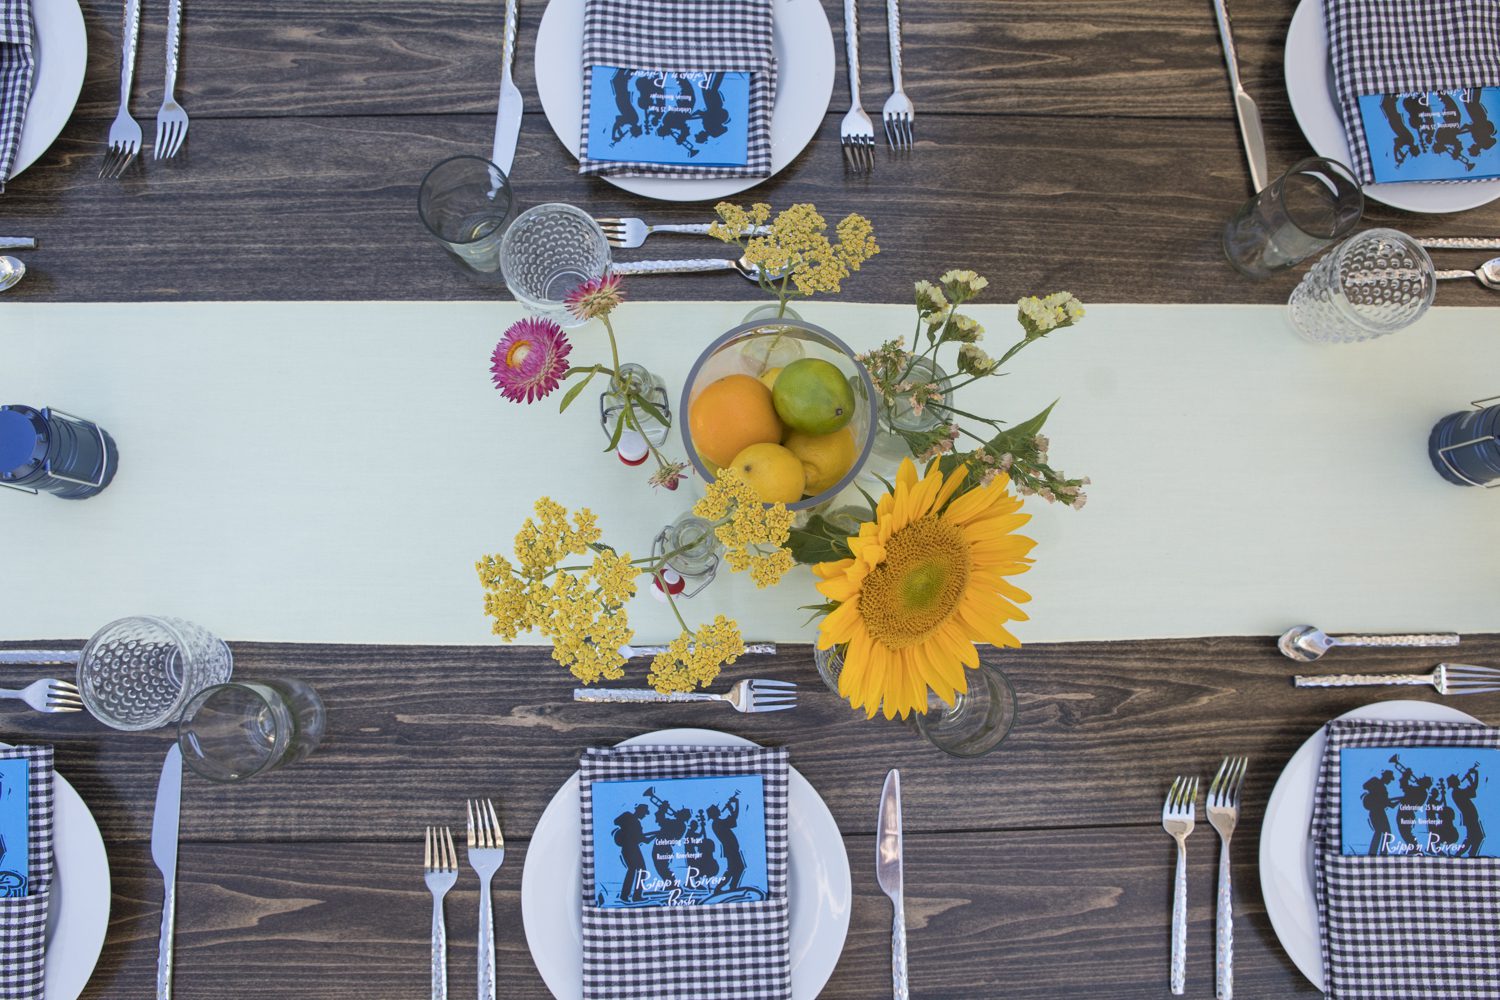 A blue and white table setting with sunflowers.